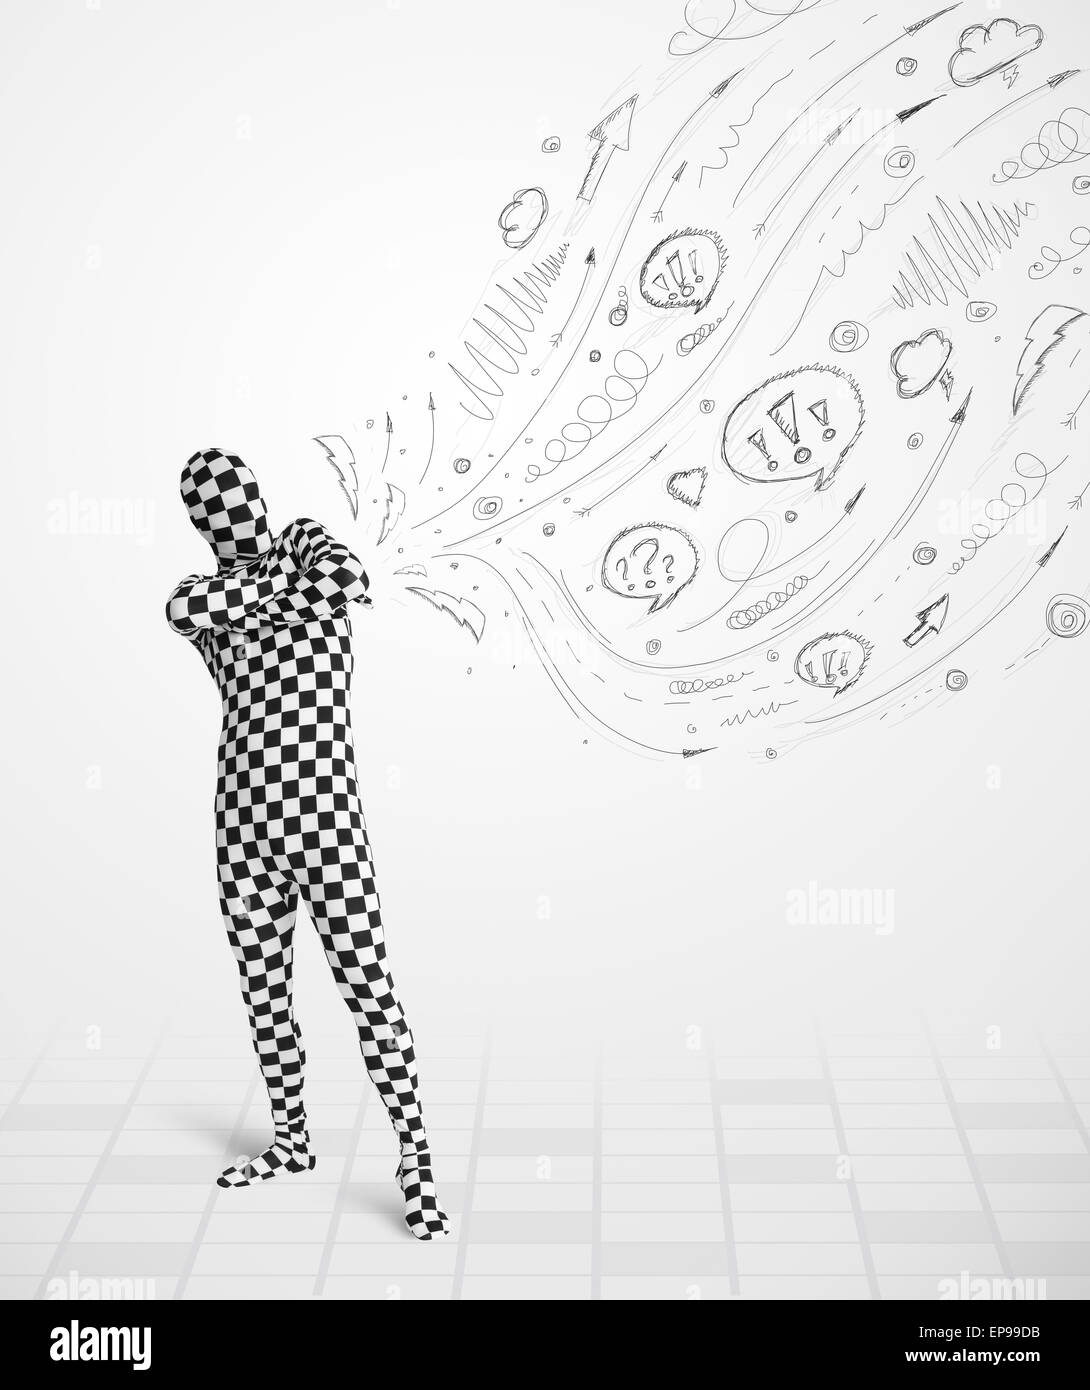 Guy in body suit morphsuit looking at sketches and doodles Stock Photo